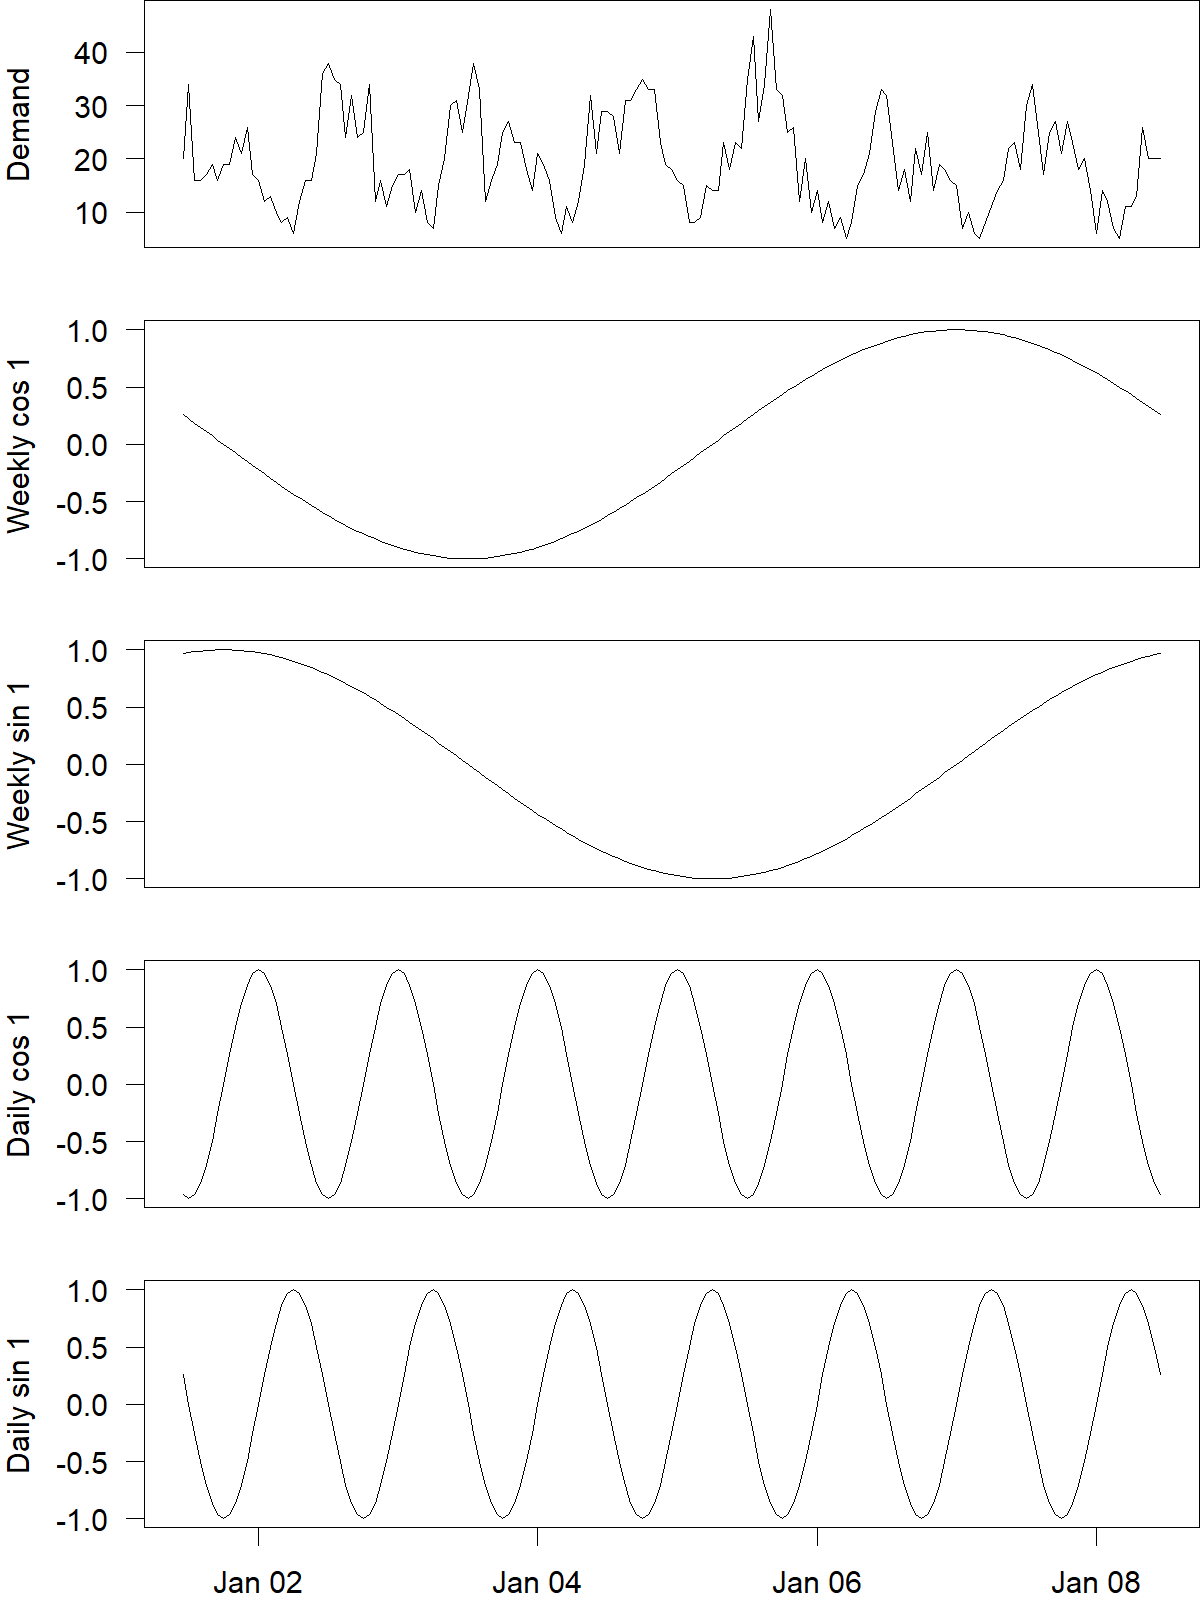  A figure containing 5 sub-plots. The common horizontal axis is labeled "Date" and shows "Jan 02", "Jan 04", "Jan 06" and "Jan 08". The top plot is labeled "Demand" and contains a time series with one week's hourly ambulance demand. The two plots below it show sine and cosine harmonics with one cycle over the week, and the two plots below that show sine and cosine harmonics with seven cycles per week, i.e., one cycle per day.